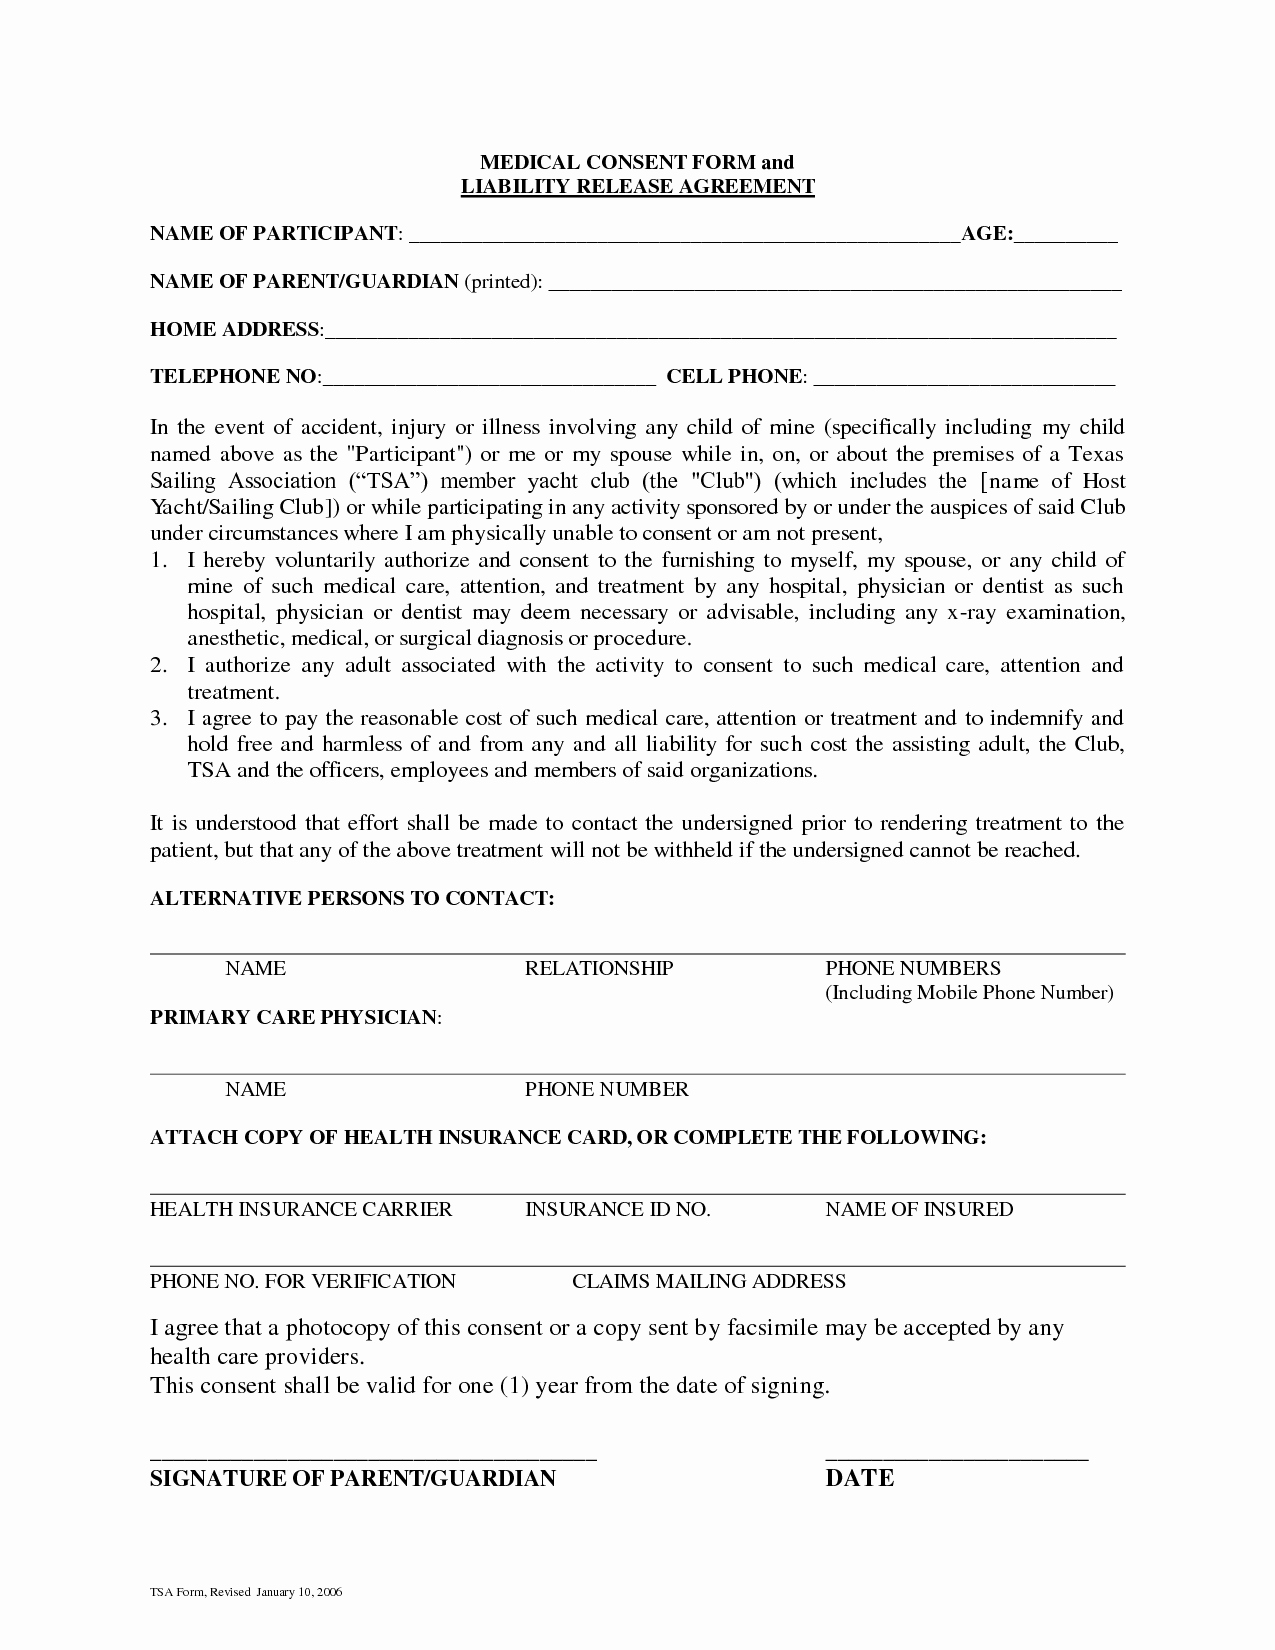 Medical Authorization form Template Unique Consent form to Release Medical Information Images